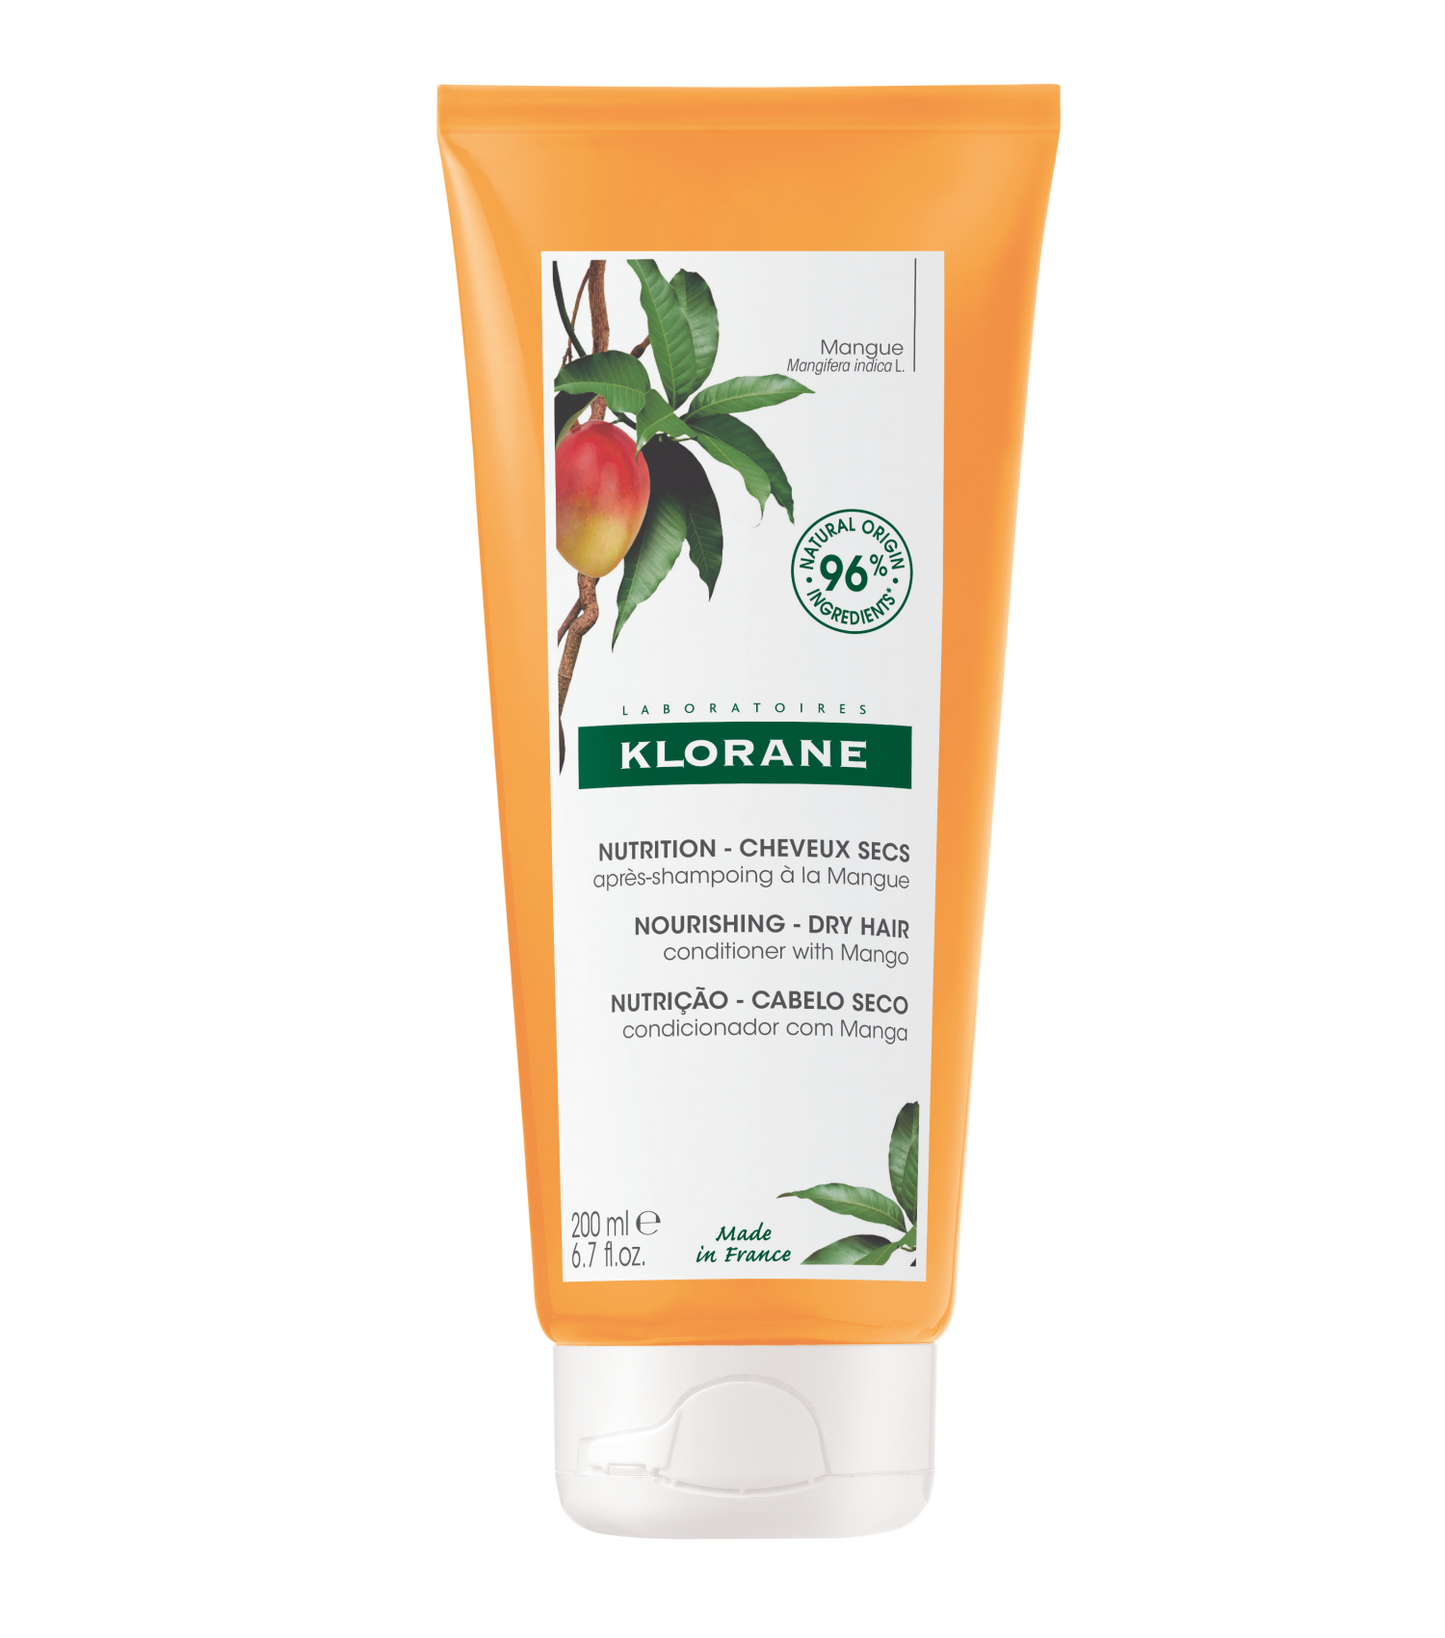 Klorane Nourishing Conditioner with Mango for Dry Hair